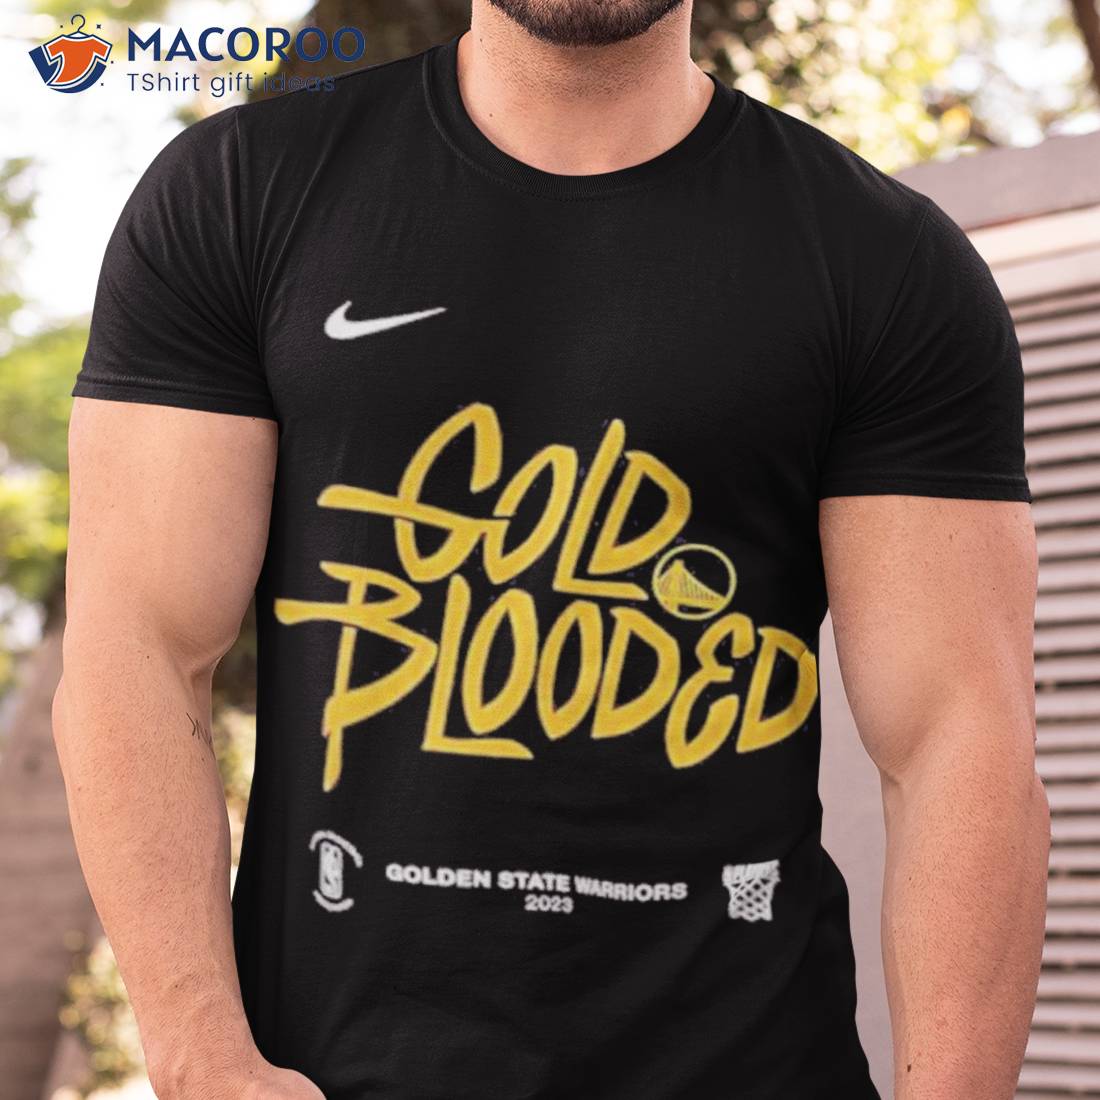 nike gold blooded warriors shirt